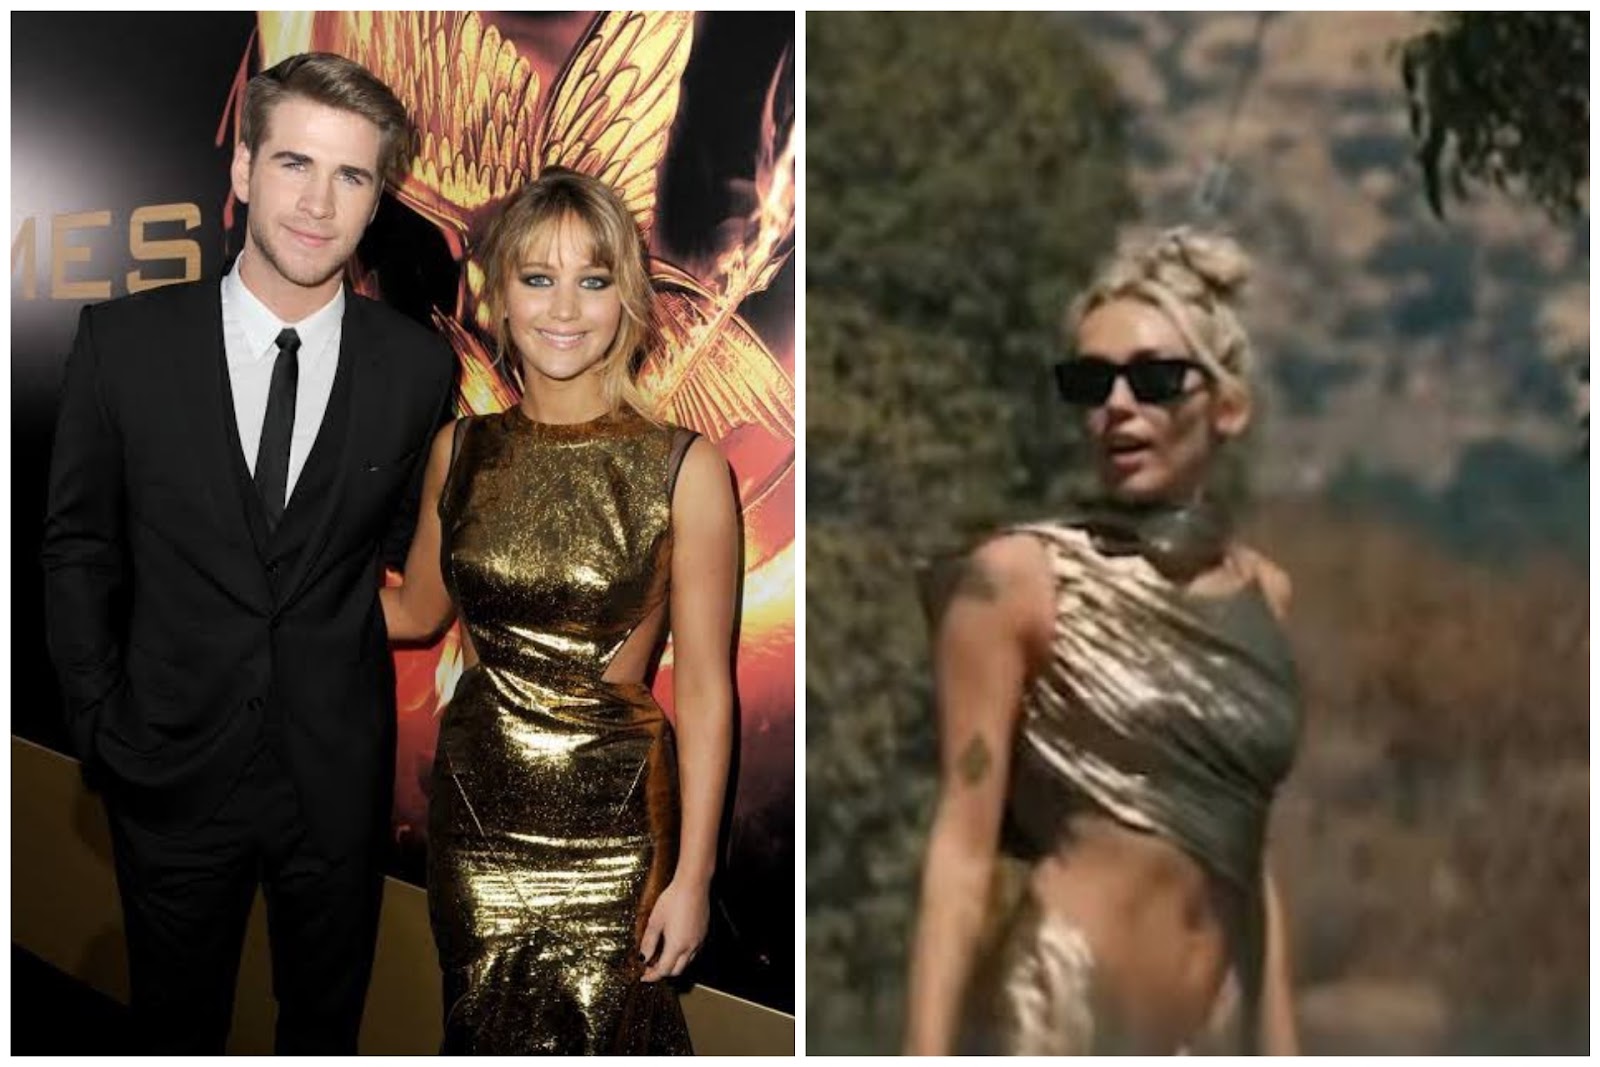 Collage of miley cyrus in "Flowers" MV and liam hemsworth and jennifer lawrence together at premiere